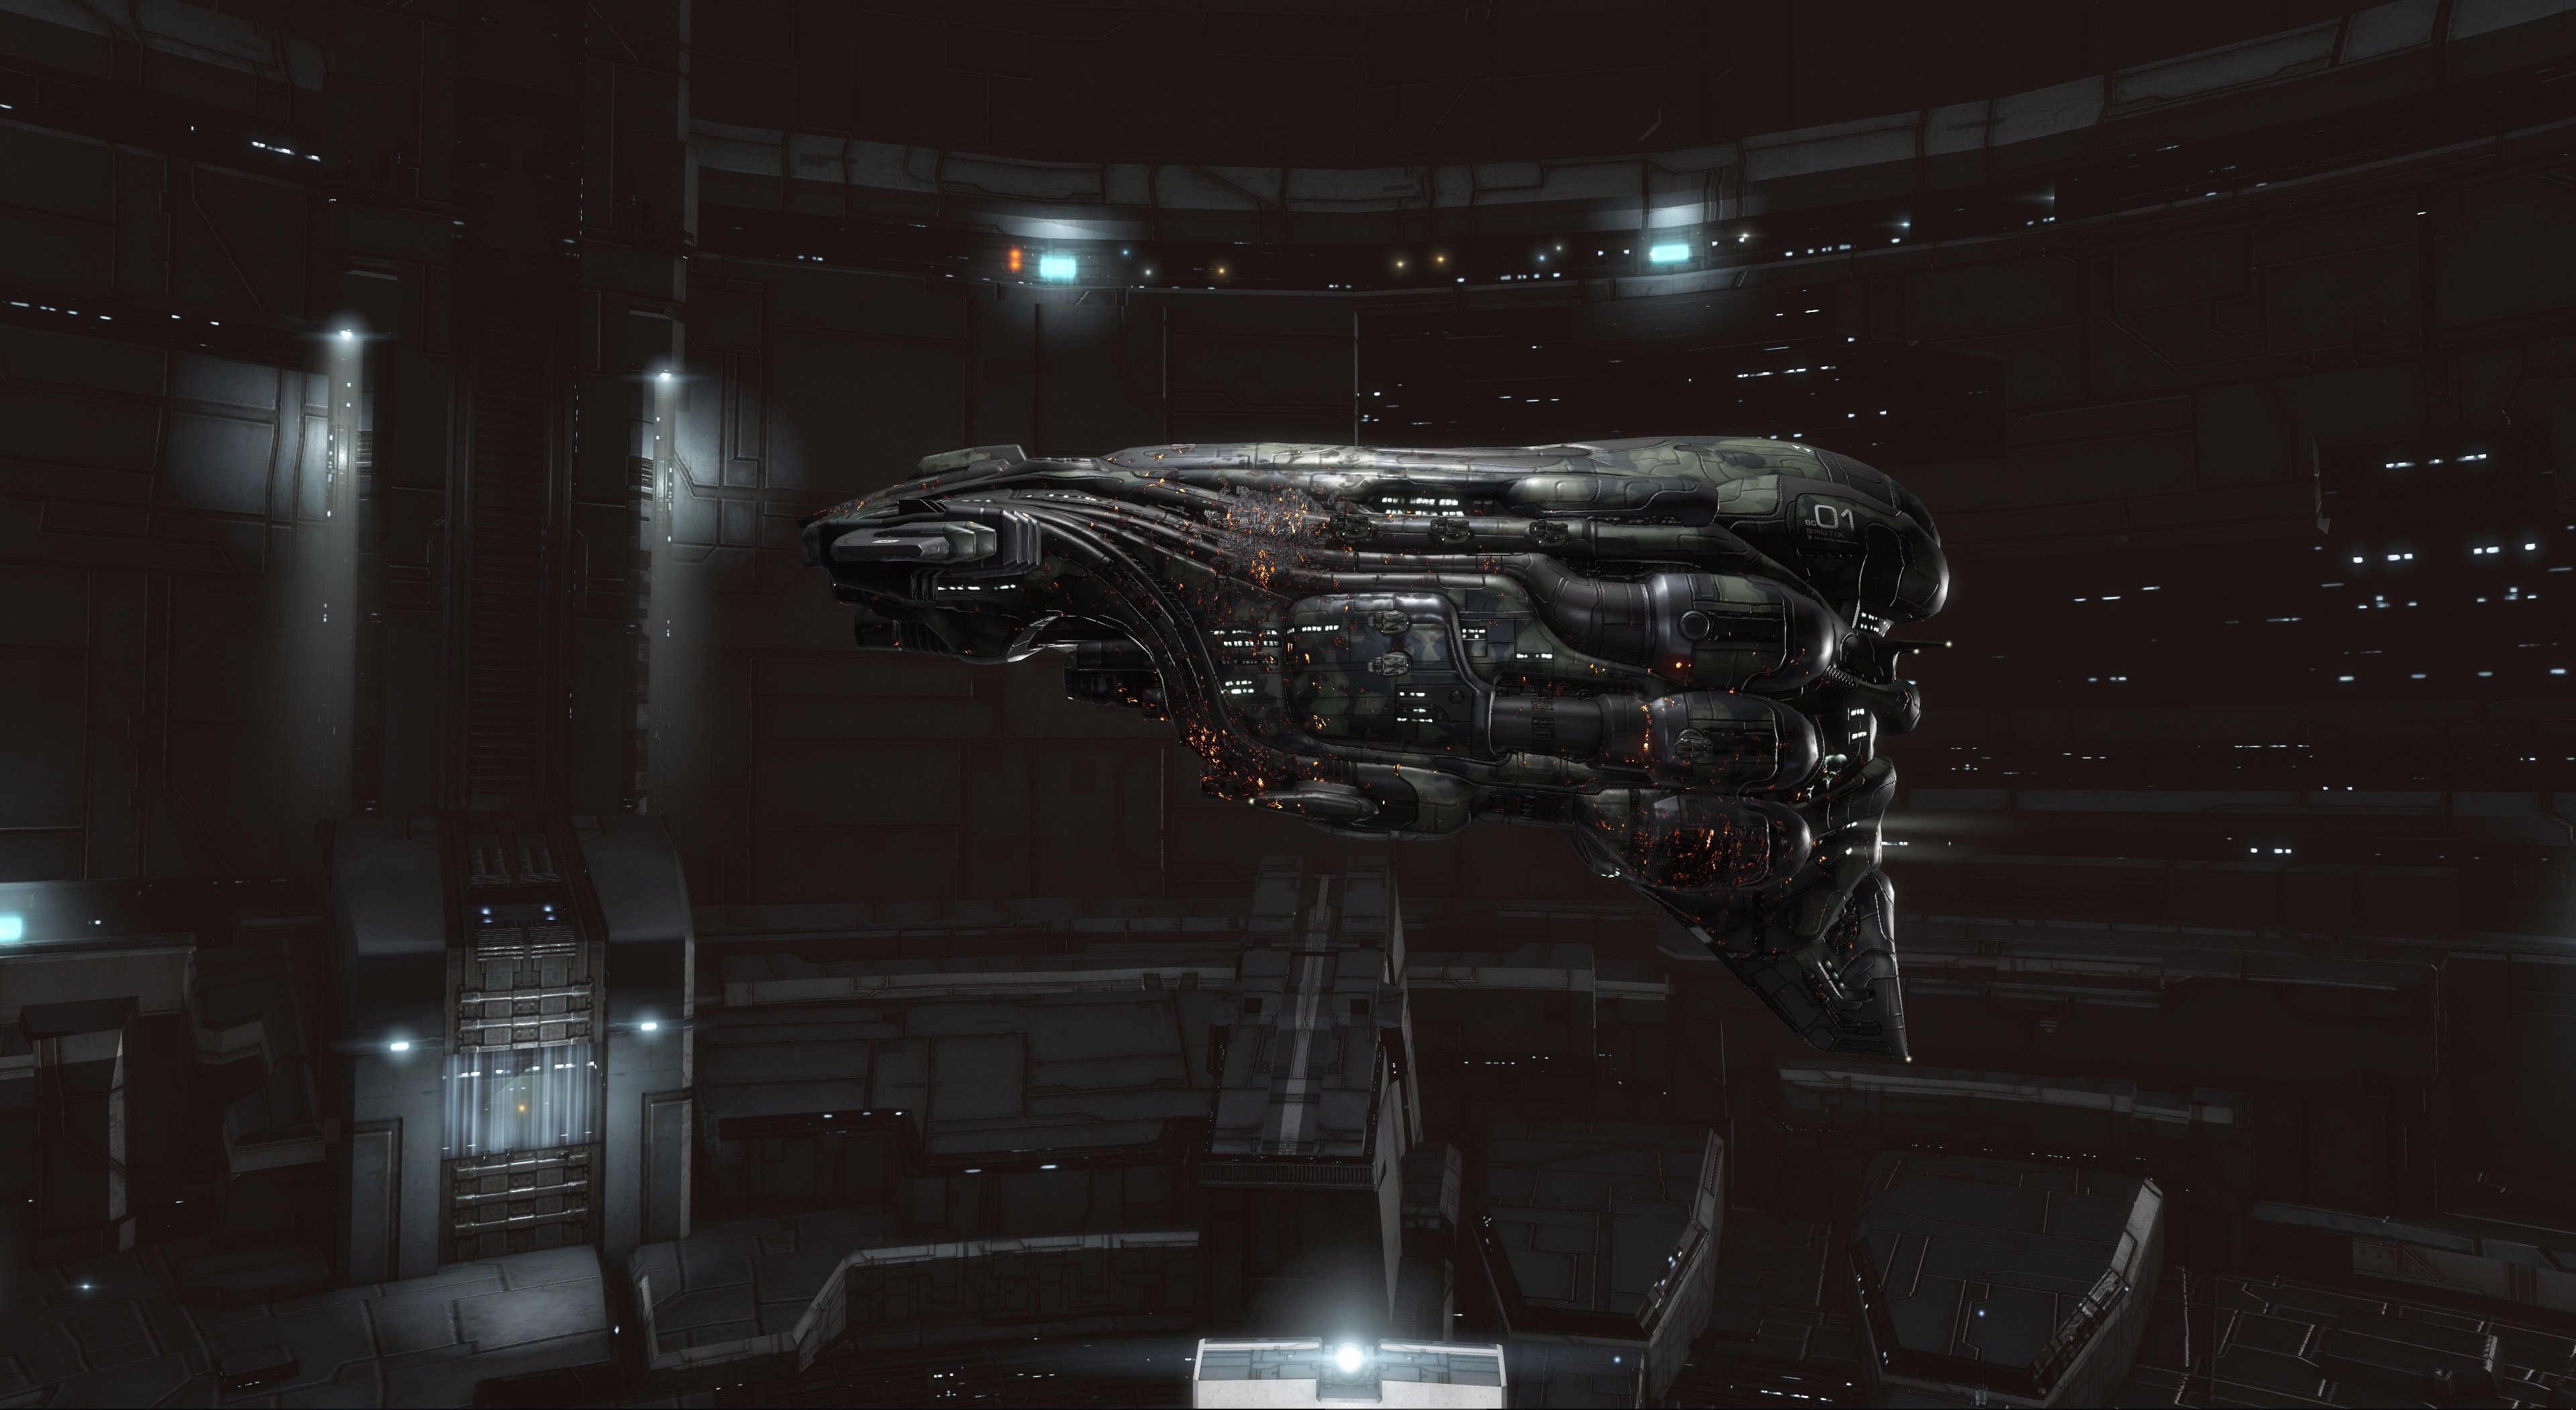 EVE Online Spaceship Battlecruiser Science Fiction PC Gaming Space Station 3839x2102